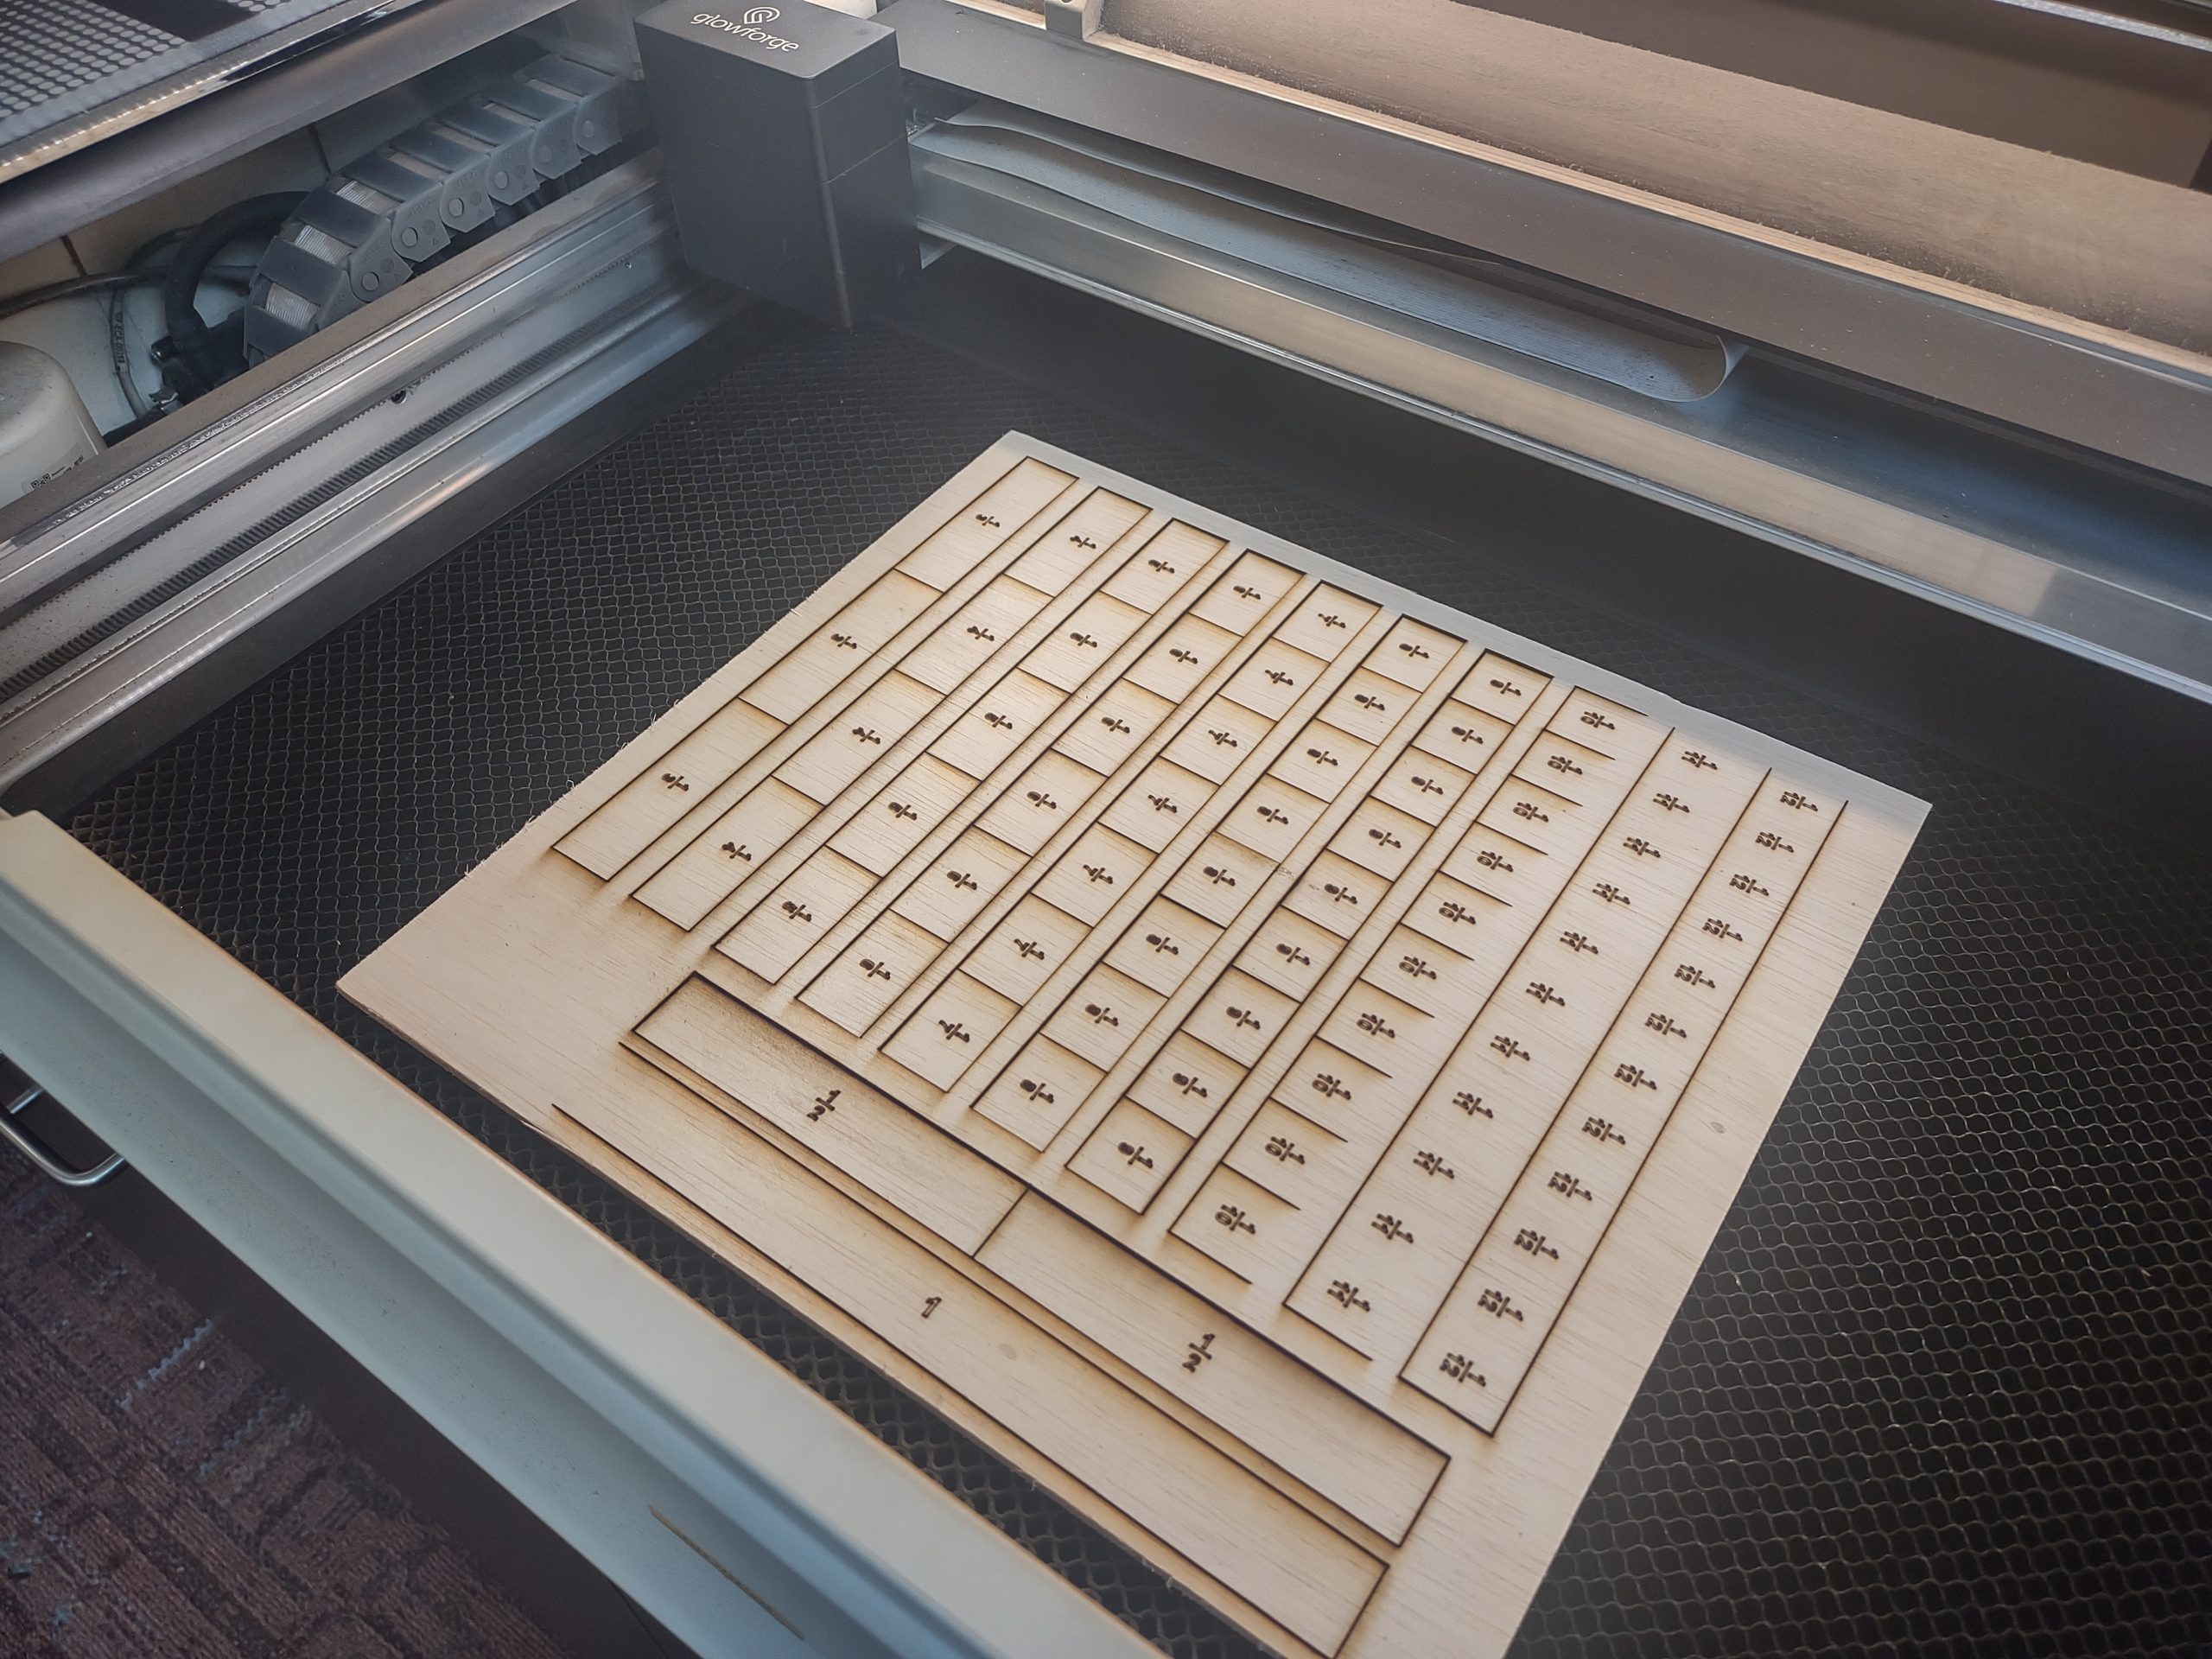 Glowforge laser printer with wooden fraction puzzle